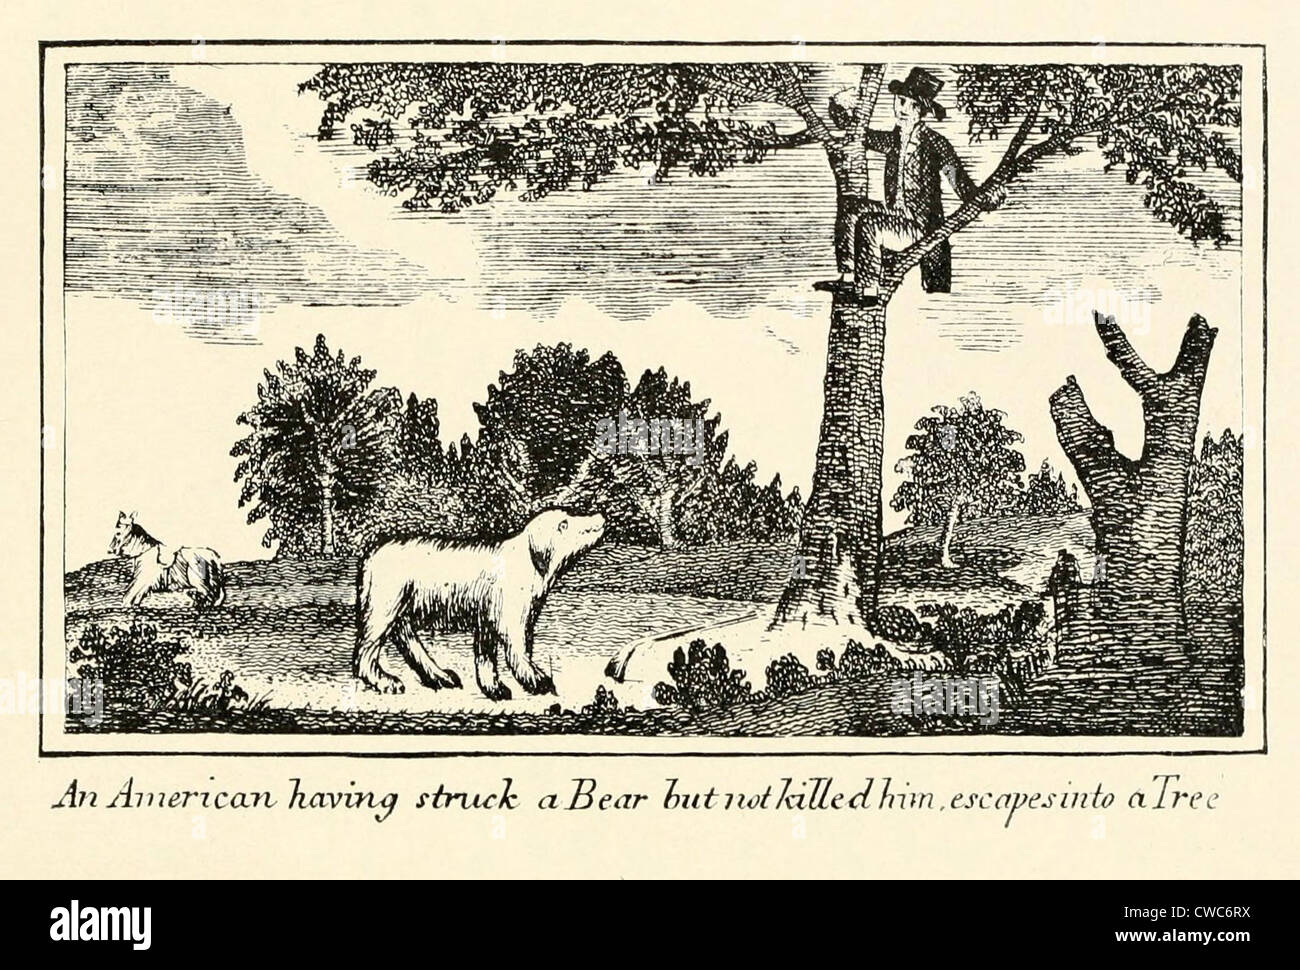 Illustration from Lewis and Clark's journal of the Corps of Discovery from 1803-6. 'American having struck a Bear but not Stock Photo